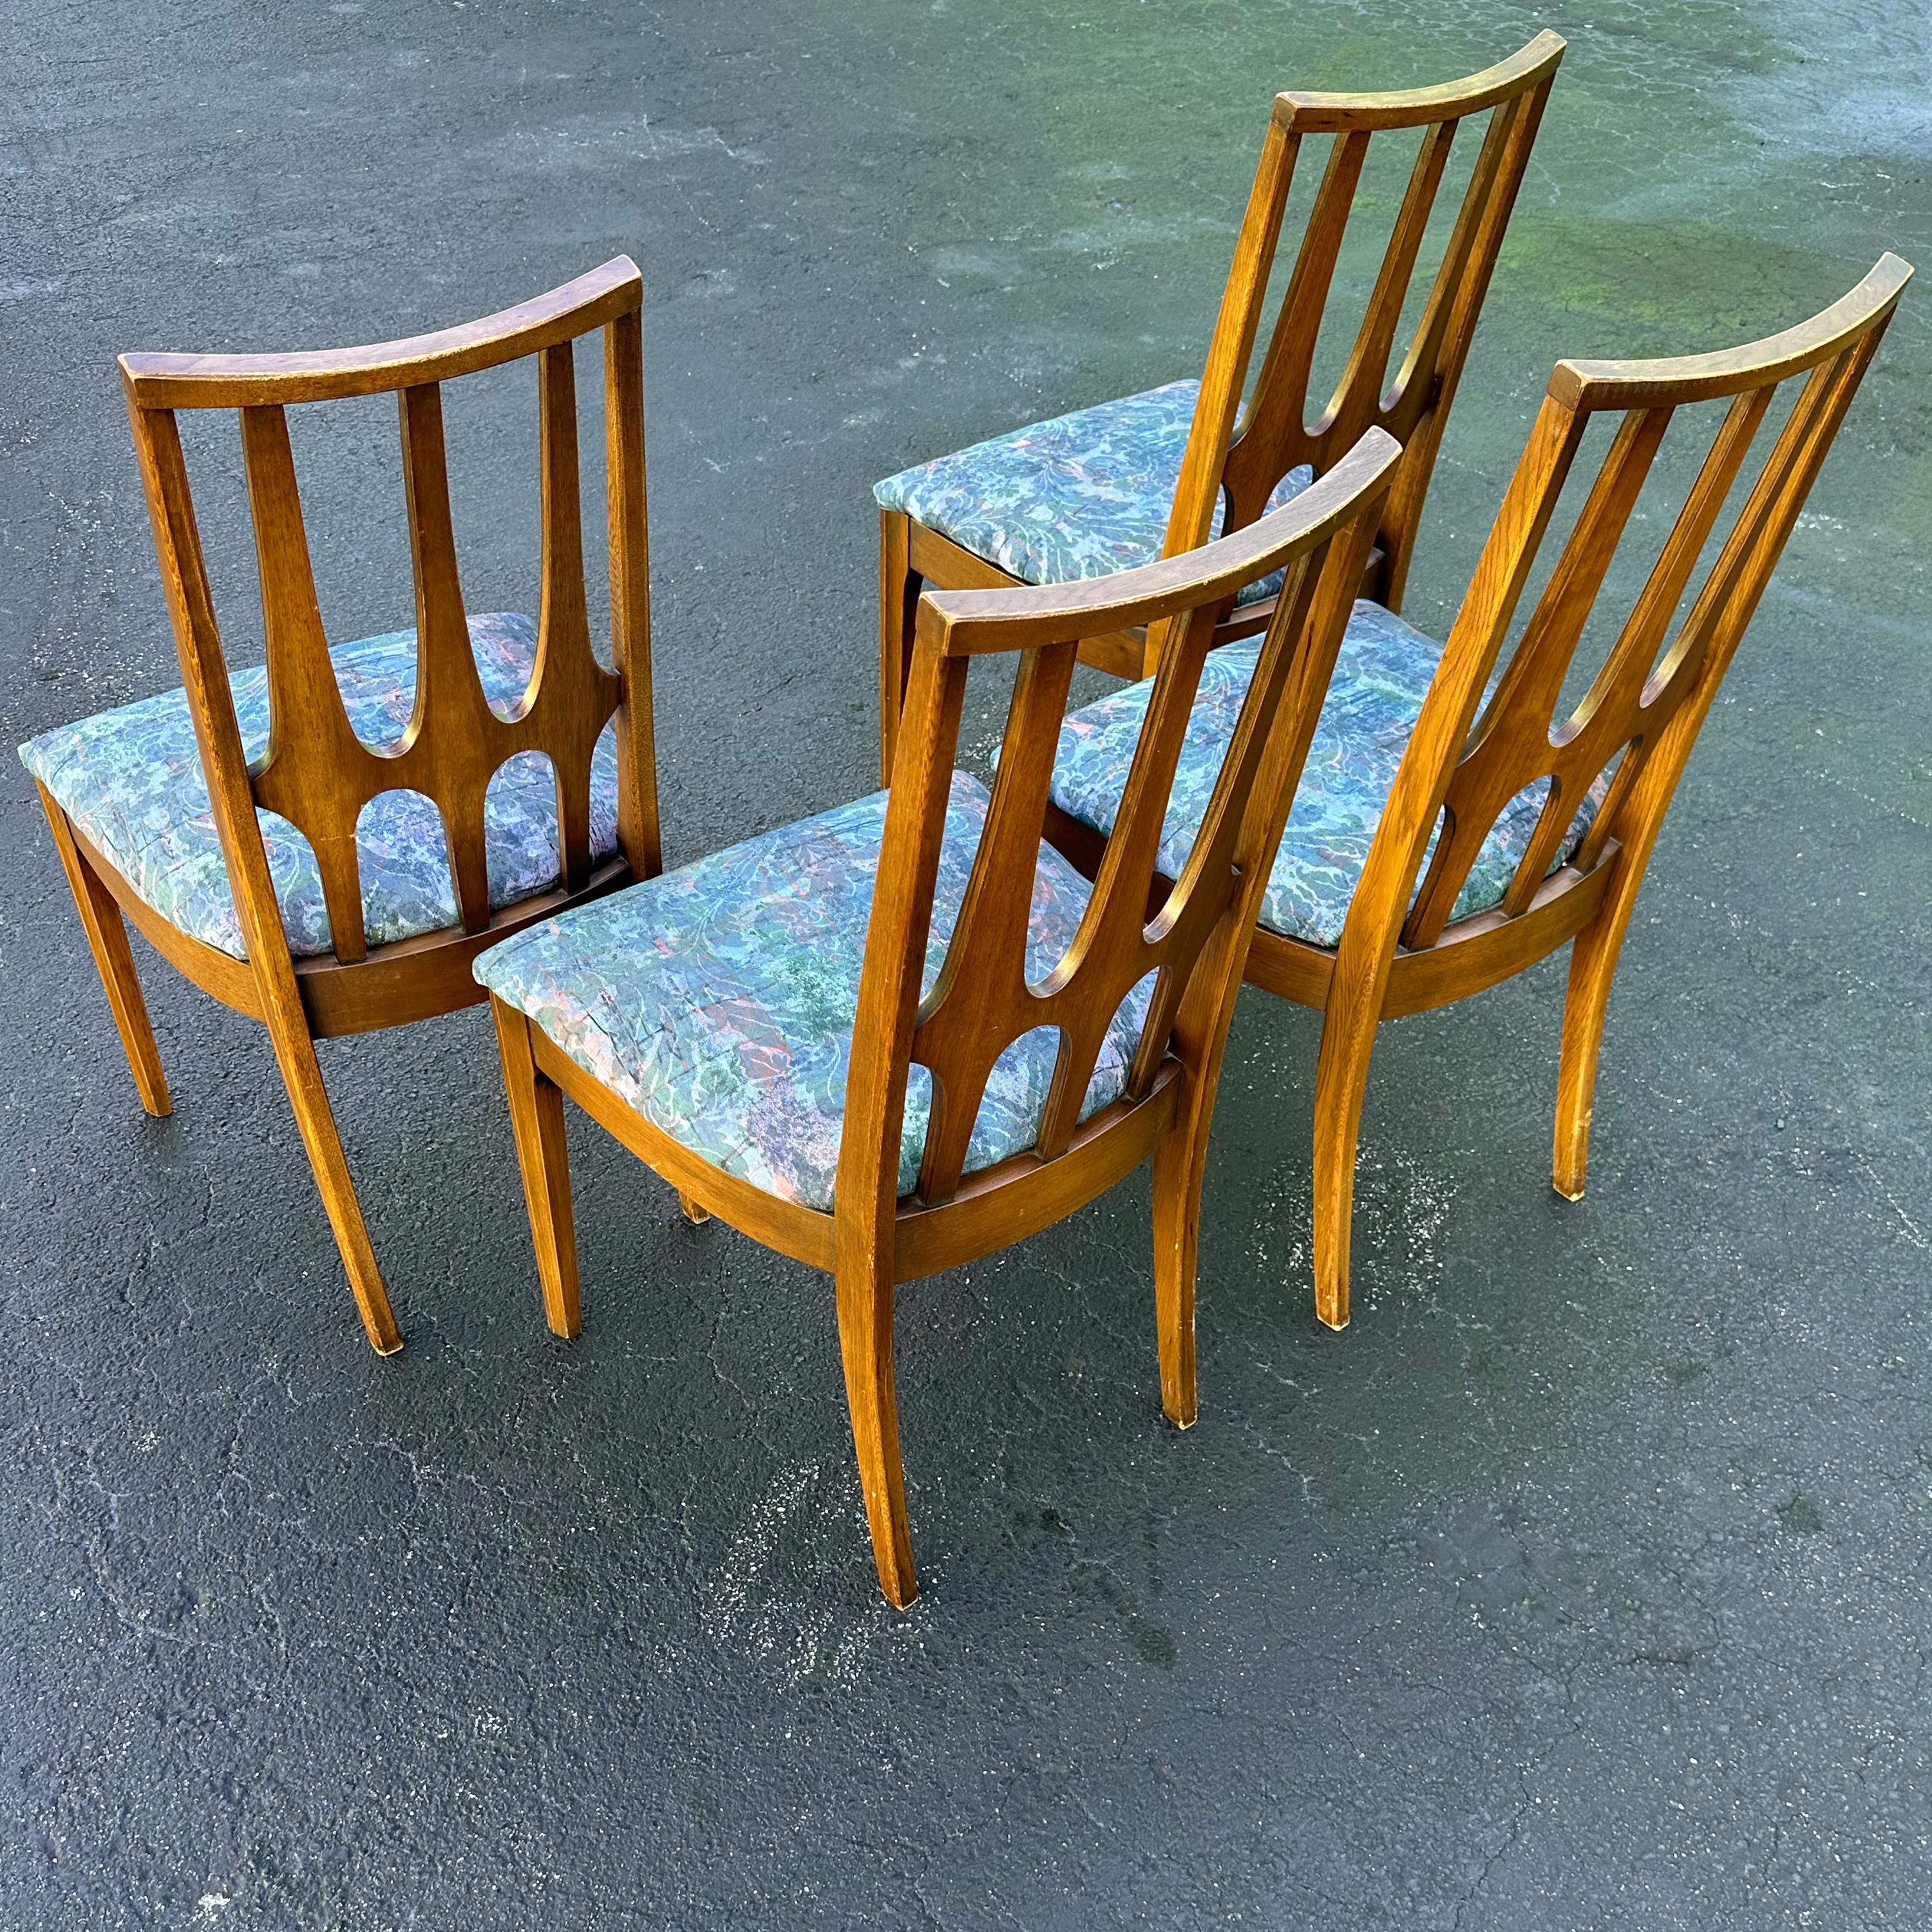 Mid-Century Modern Brasilia set of 4 dining chairs by Broyhill. Originally designed in the 1960s, based on the designs of architect Oscar Niemeyer coming from the capital city of Brazil, Brasilia. Good vintage condition with some wear from age and